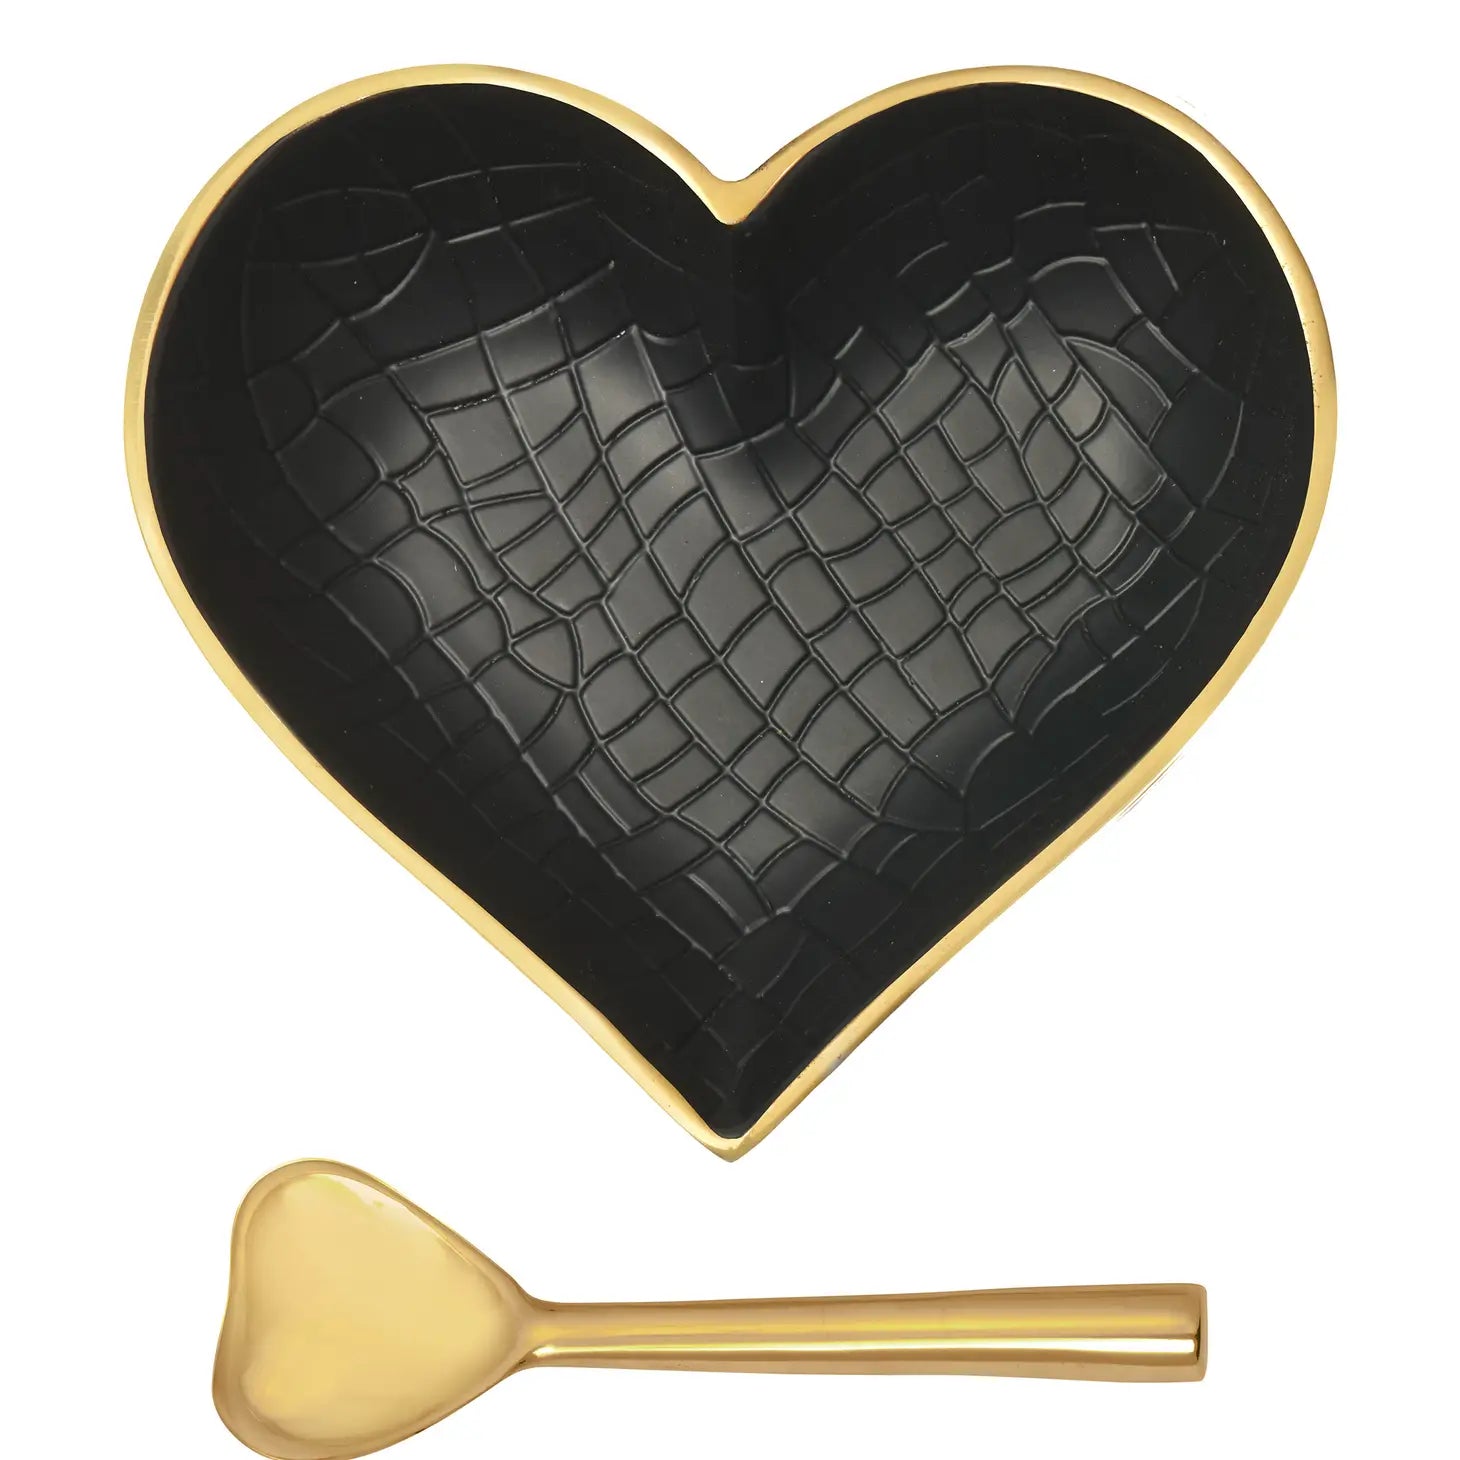 Gold & Black Croco Heart with Gold Heart Spoon